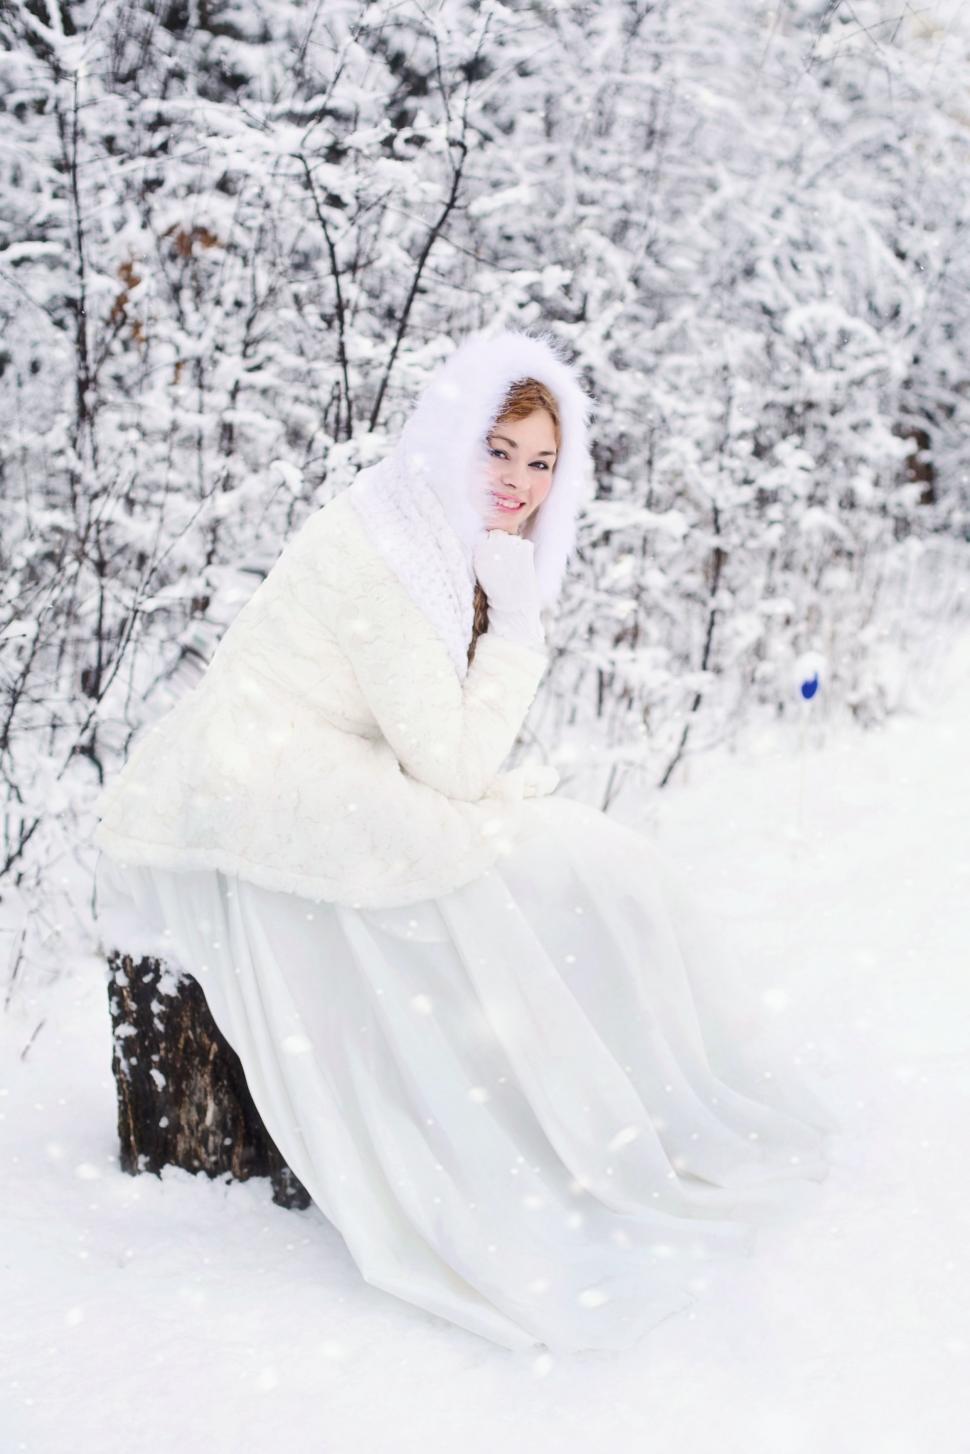 Free Image of Woman in White Gown with Snow - Looking at camera 